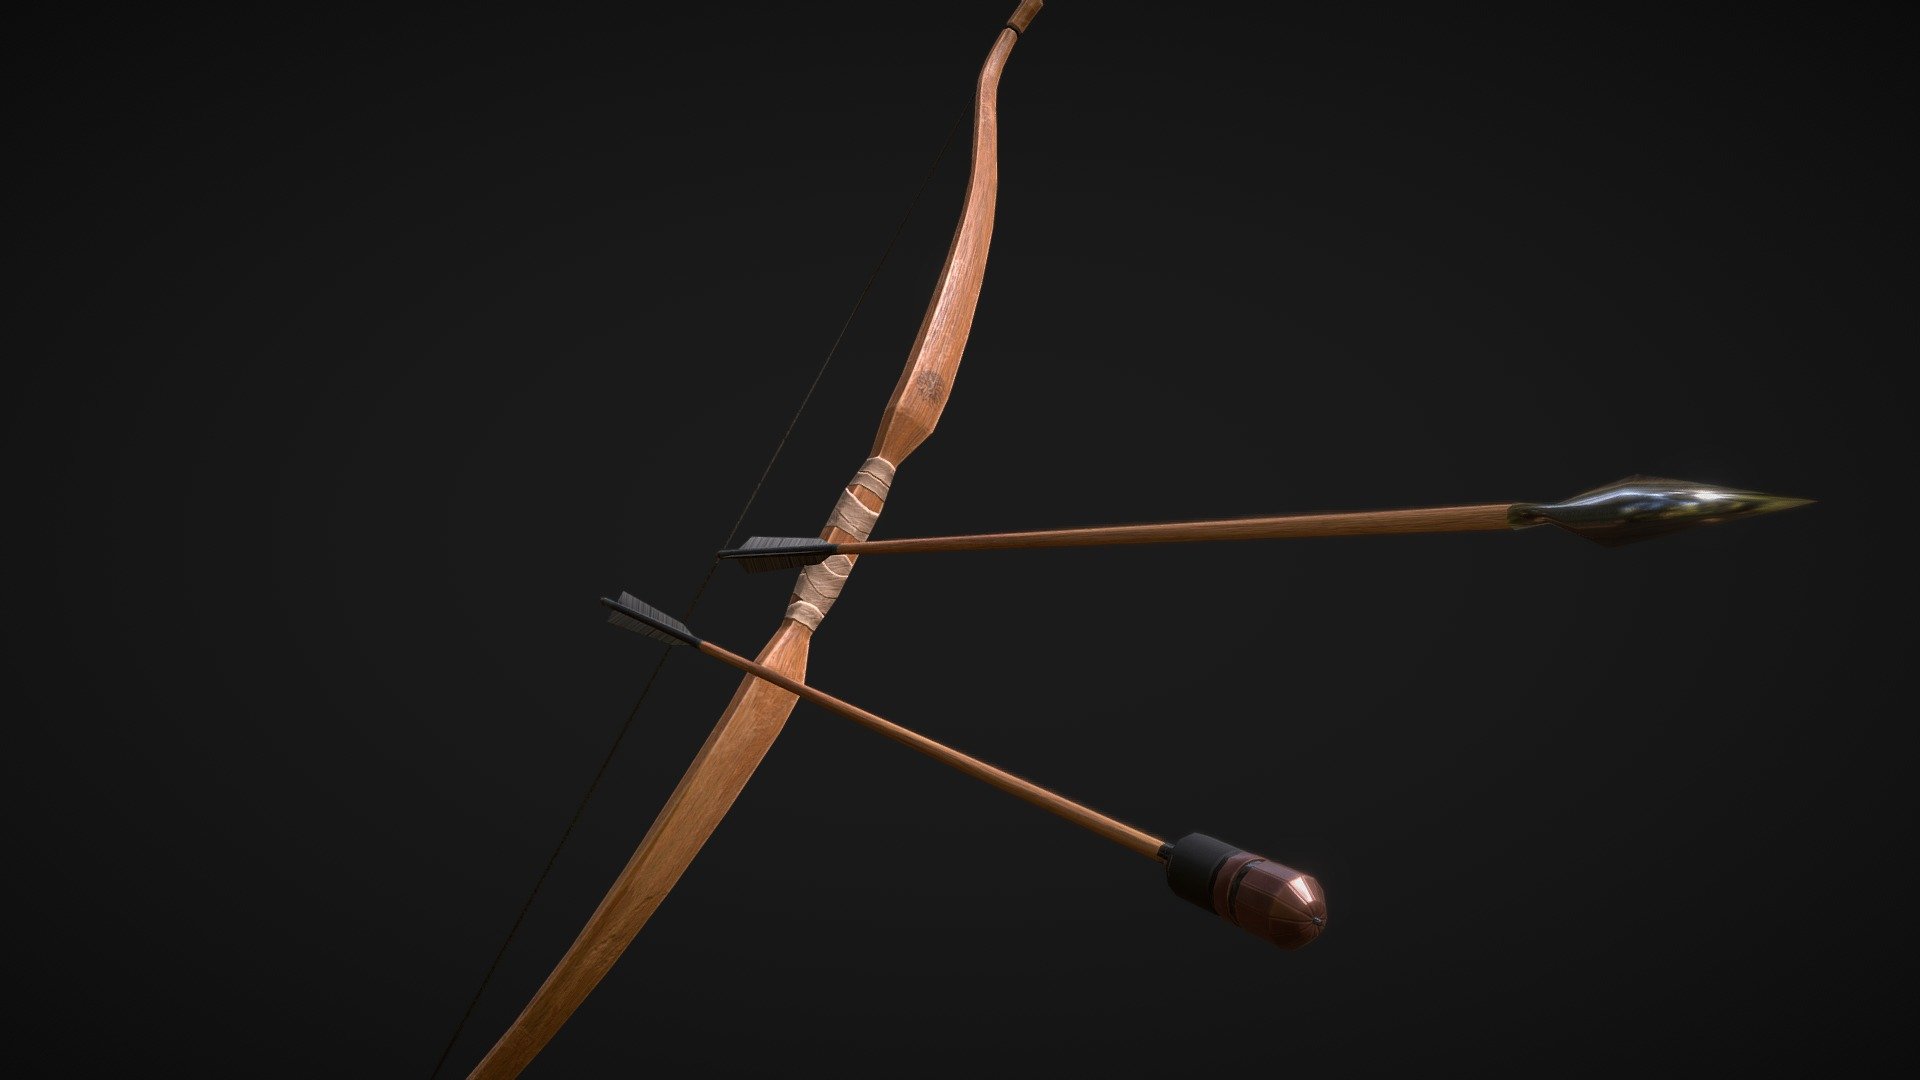 Software used
Modelled and rigged in Blender, textured in Substance Painter.

Features and Contents
* Game ready
* Rigged
* Two arrow models; flat bladed &amp; explosive arrow
* Blend file available w/ rigged-animated model &amp; rigged-only model
* Model exports; FBX, DAE, OBJ
* Textures; PNG 4k

Extras
* Draw &amp; release animation. Preview here: https://skfb.ly/o6snW
* Blender file - Longbow and Arrow (Rigged/GameReady) - Buy Royalty Free 3D model by Emanuel (@thismanuel) 3d model